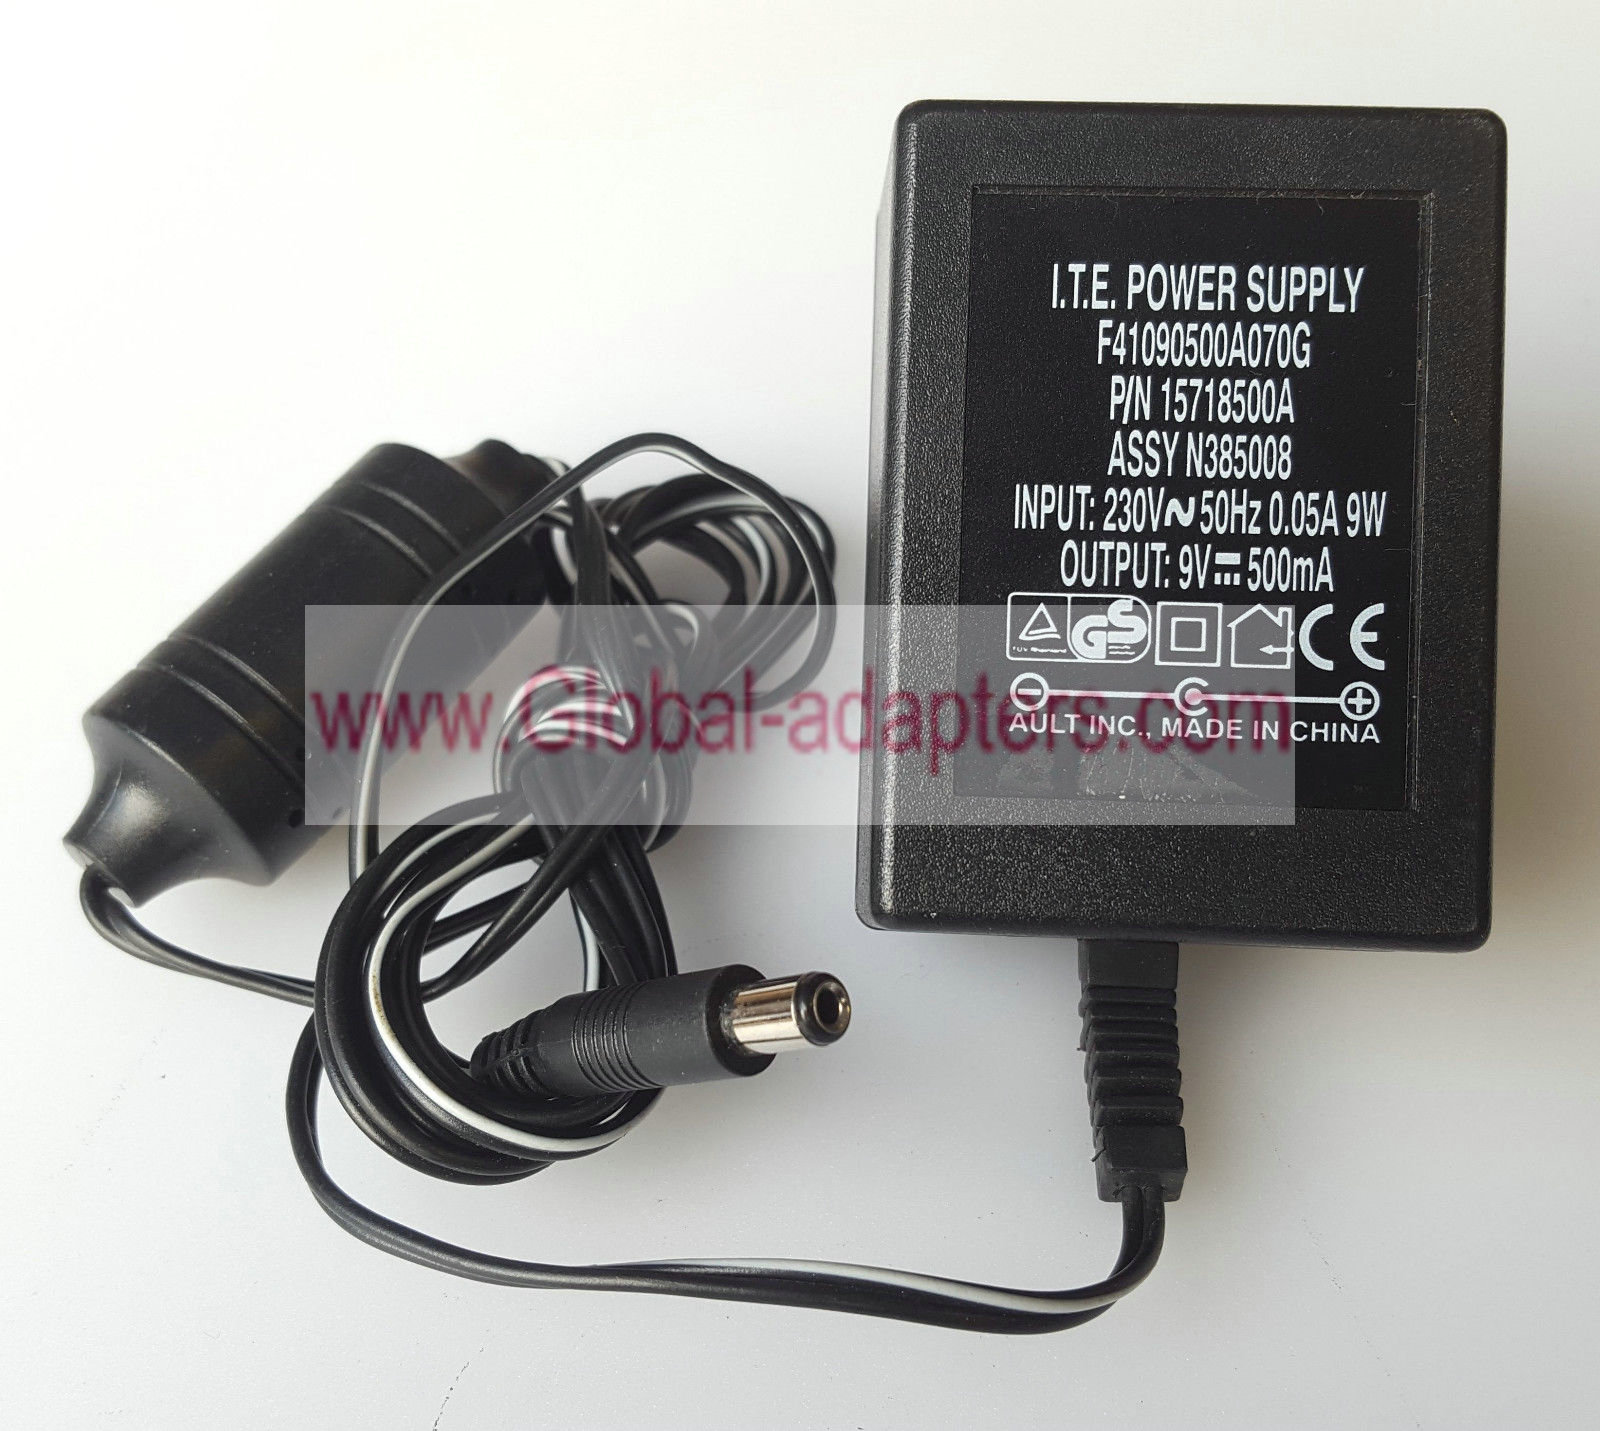 New AULT INC.F41090500A070G AC/DC POWER SUPPLY ADAPTER 9V 0.5A 15718500A Charger